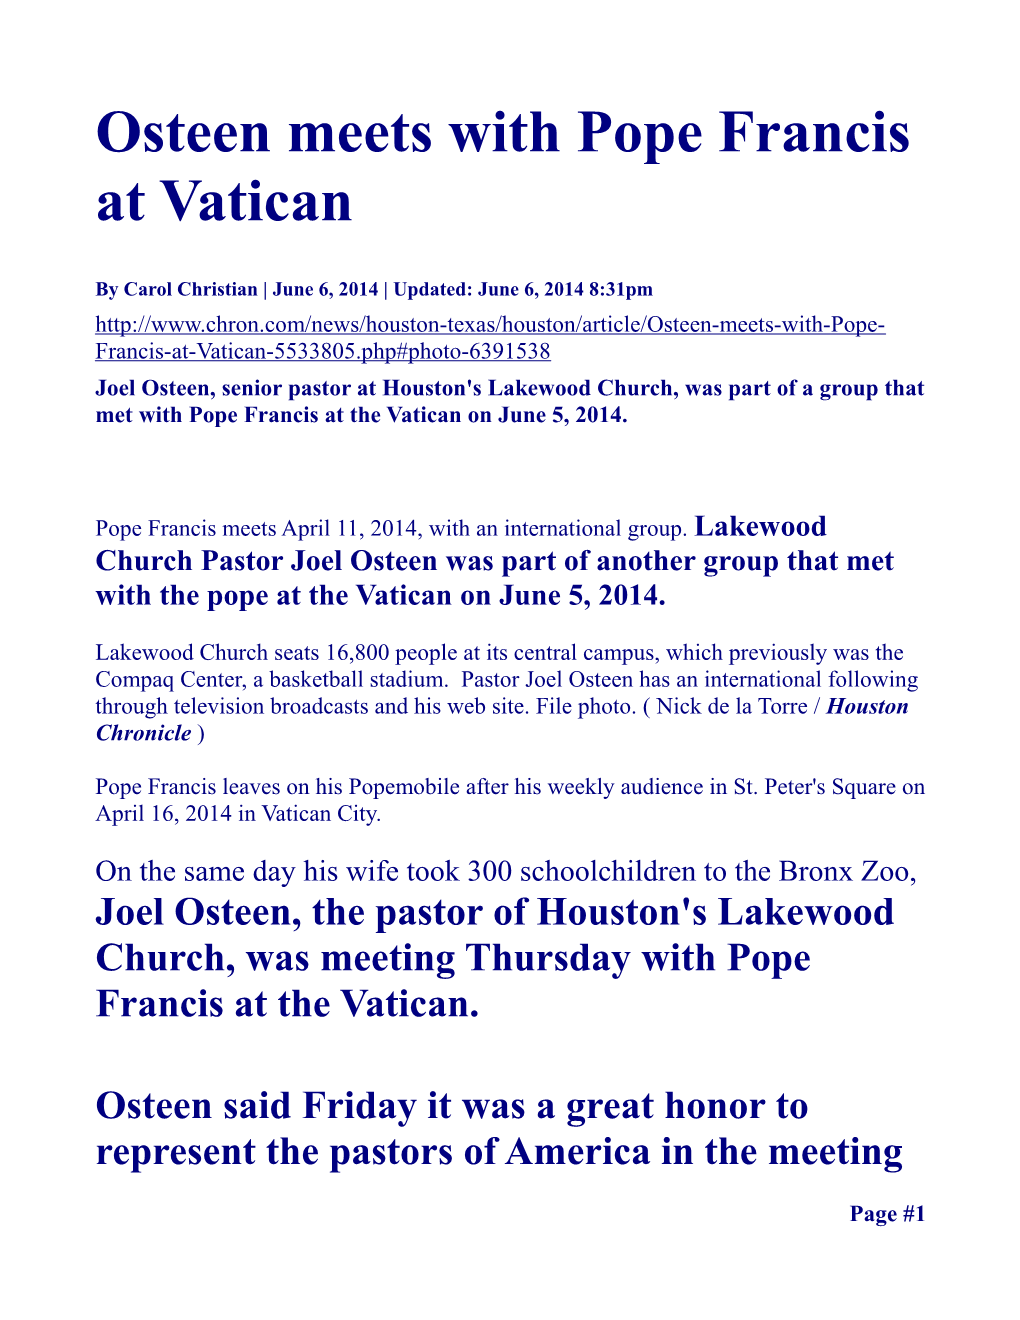 Osteen Meets with Pope Francis at Vatican